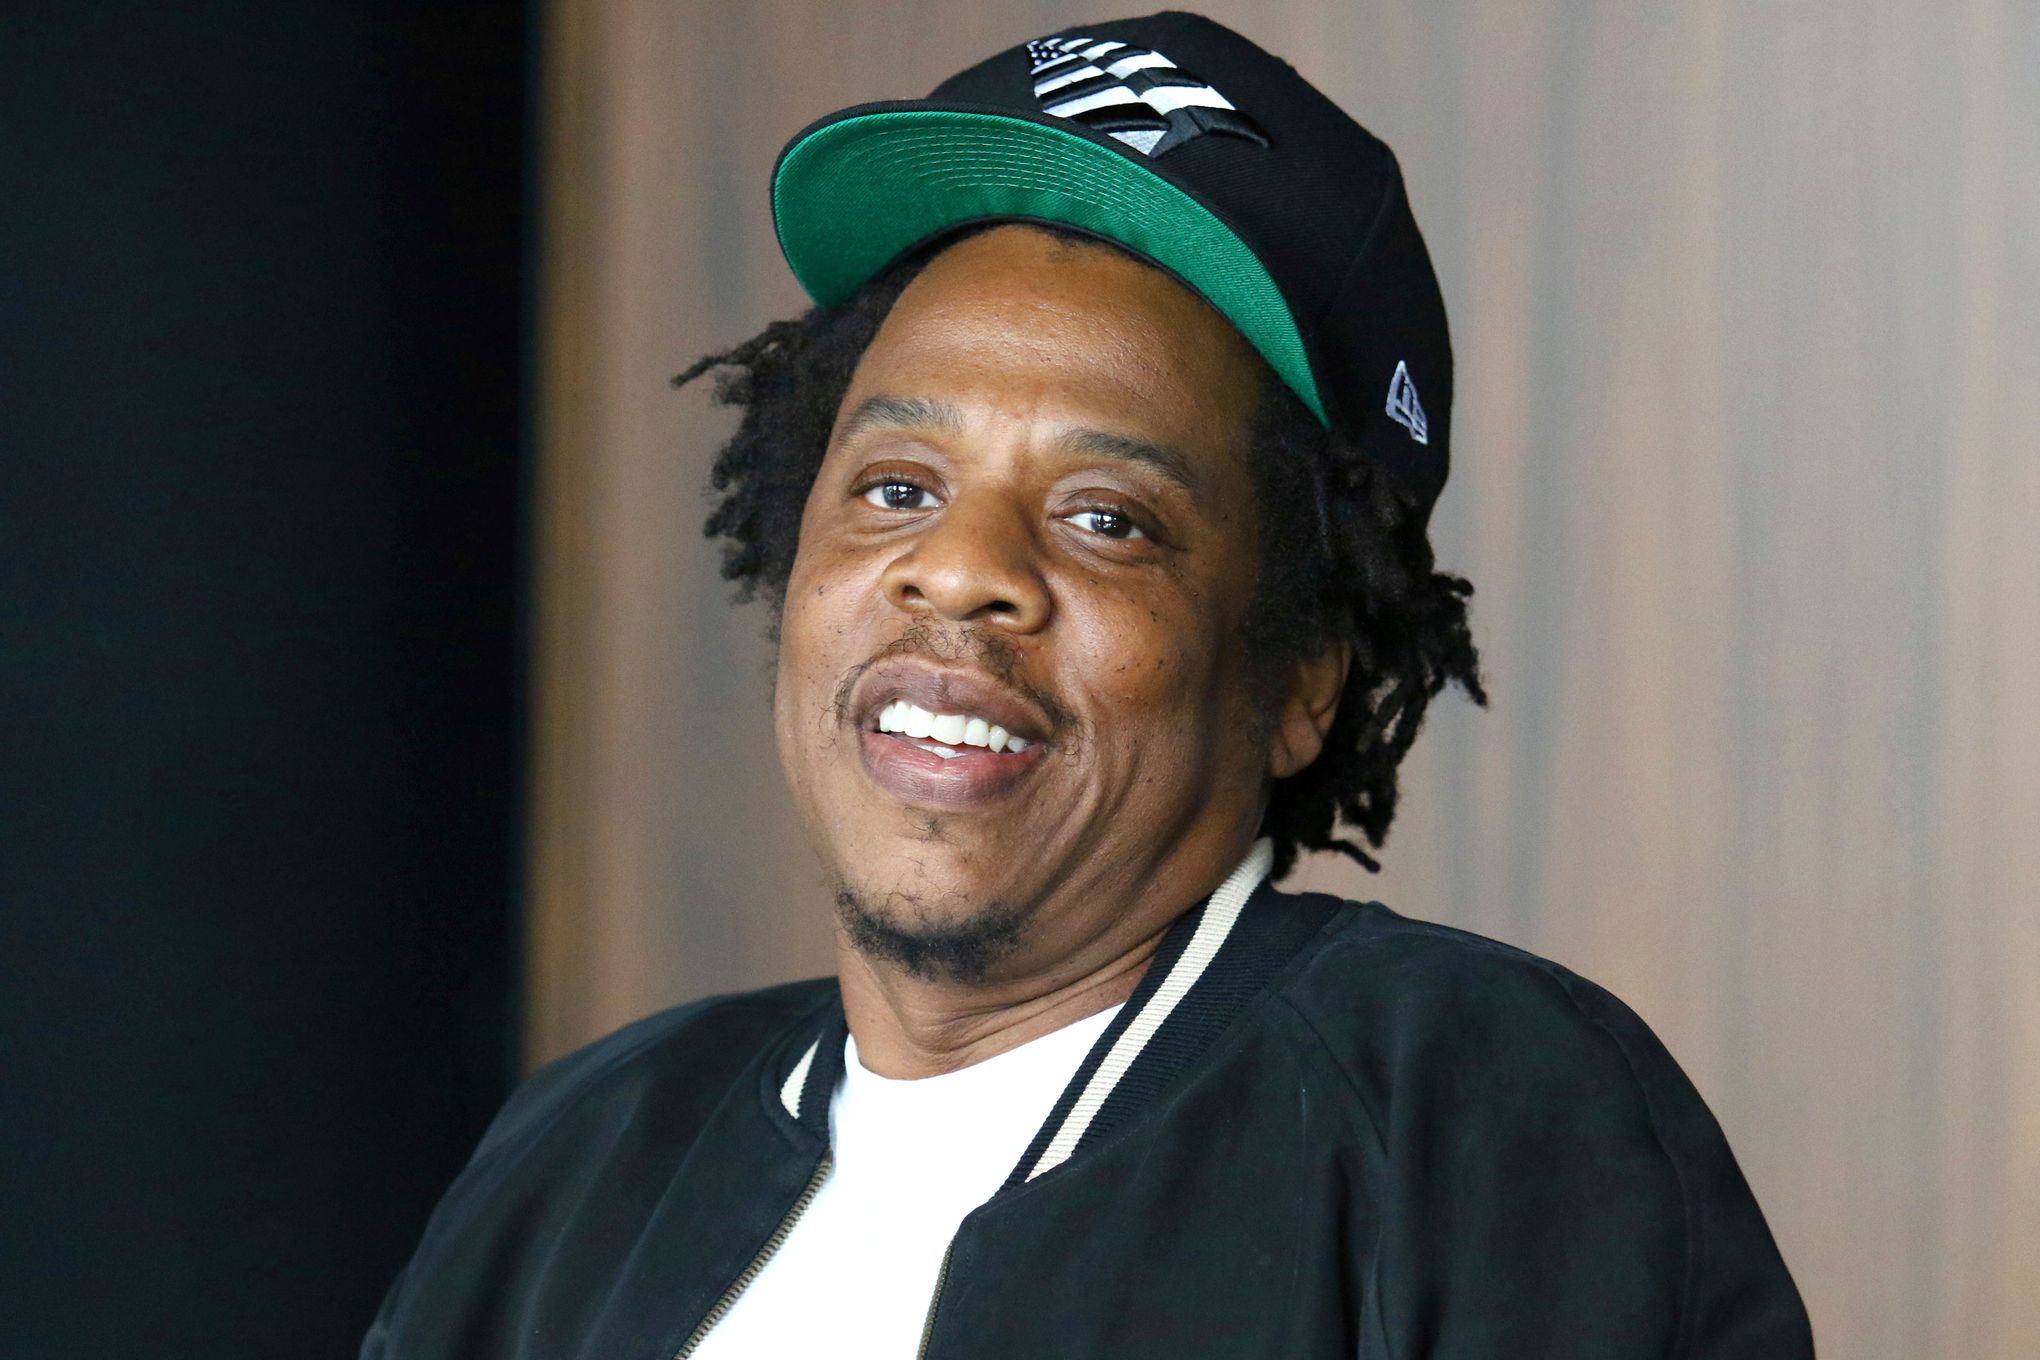 Jay-Z Sells 50% Ownership Stake of Ace of Spades to Moët Hennessy